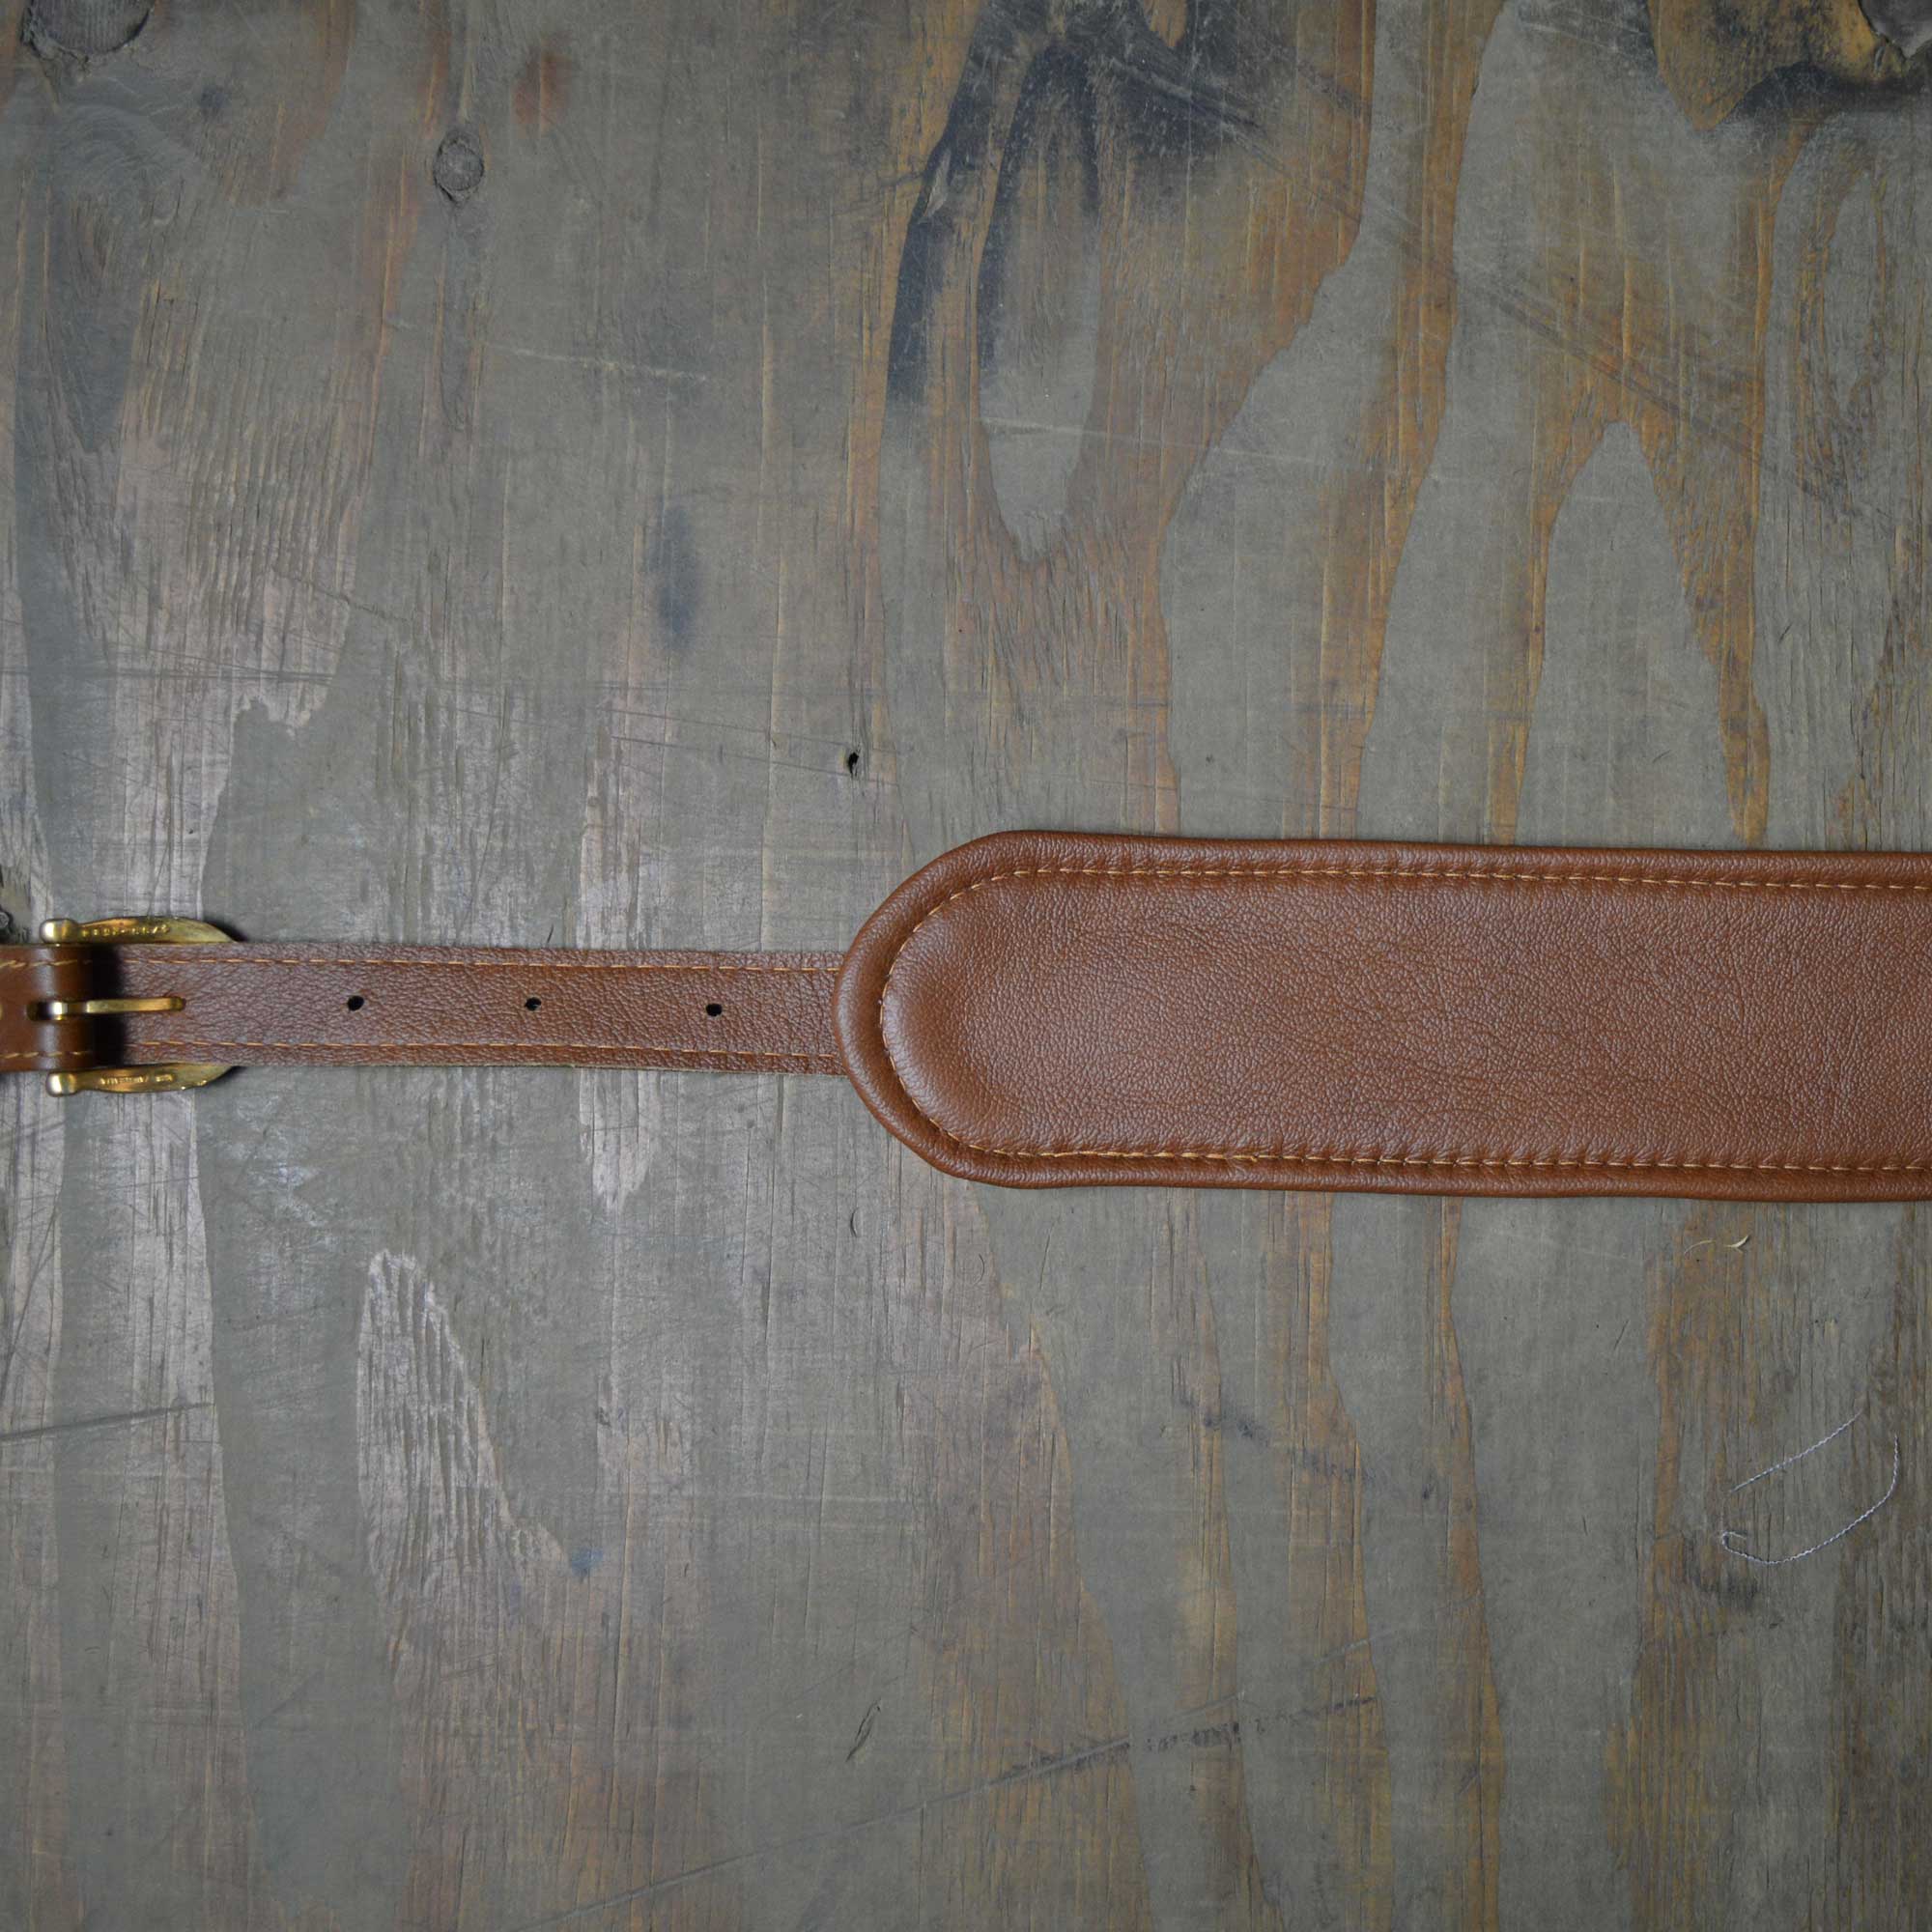 Vintage style guitar strap made with a topgrain leather top and an upholstery backing. Brown & Tan